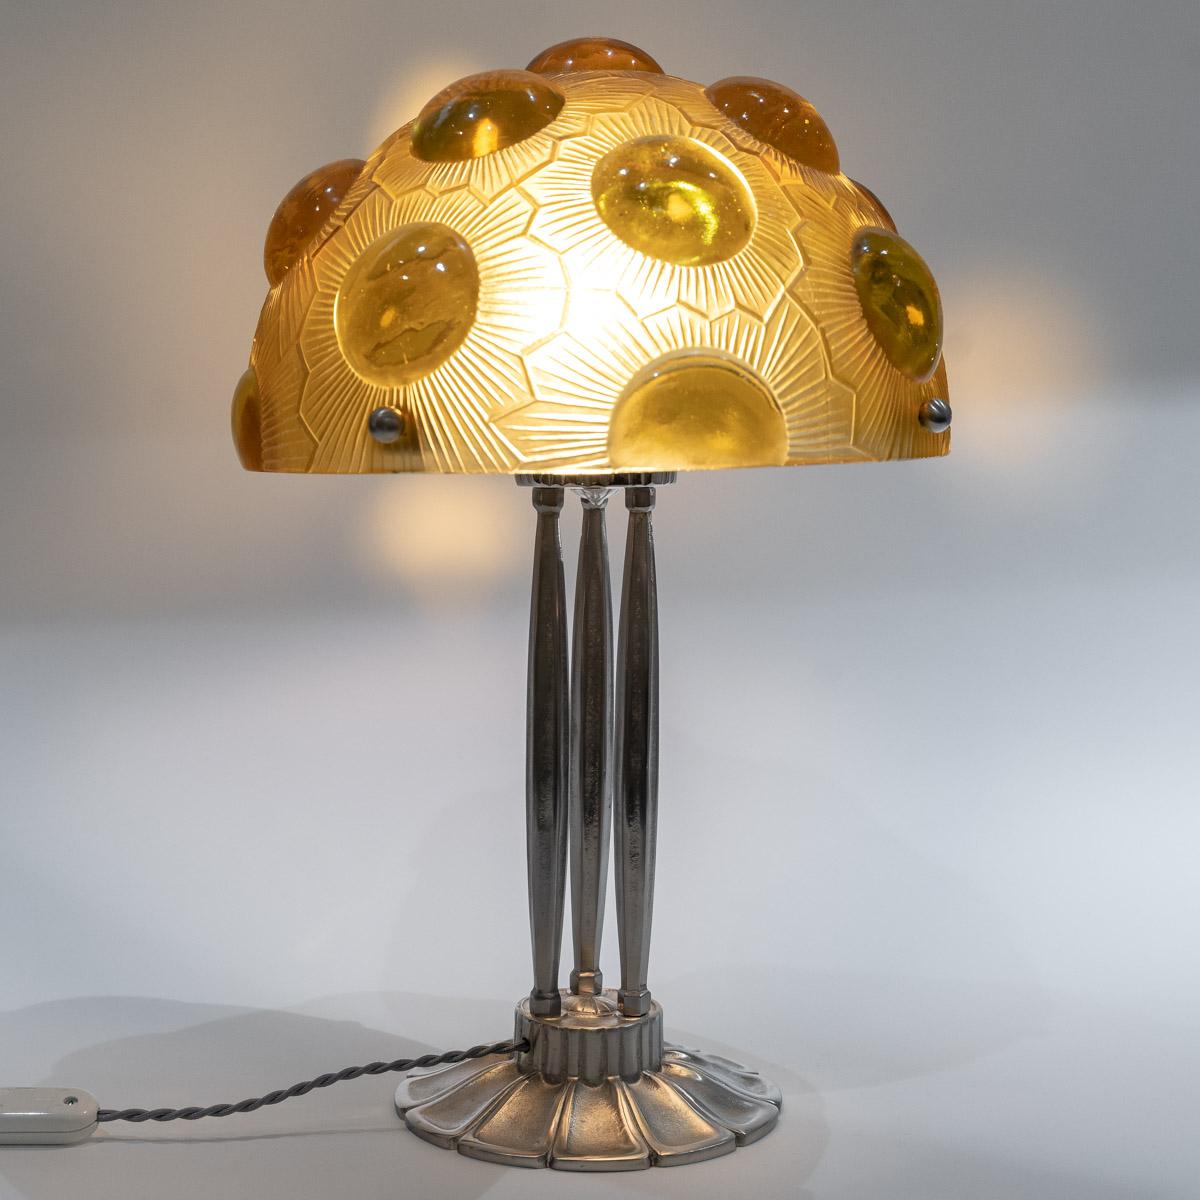 Molded 1926 René Lalique, Lamp Soleil Amber Yellow Glass and Nickel Plated Bronze For Sale